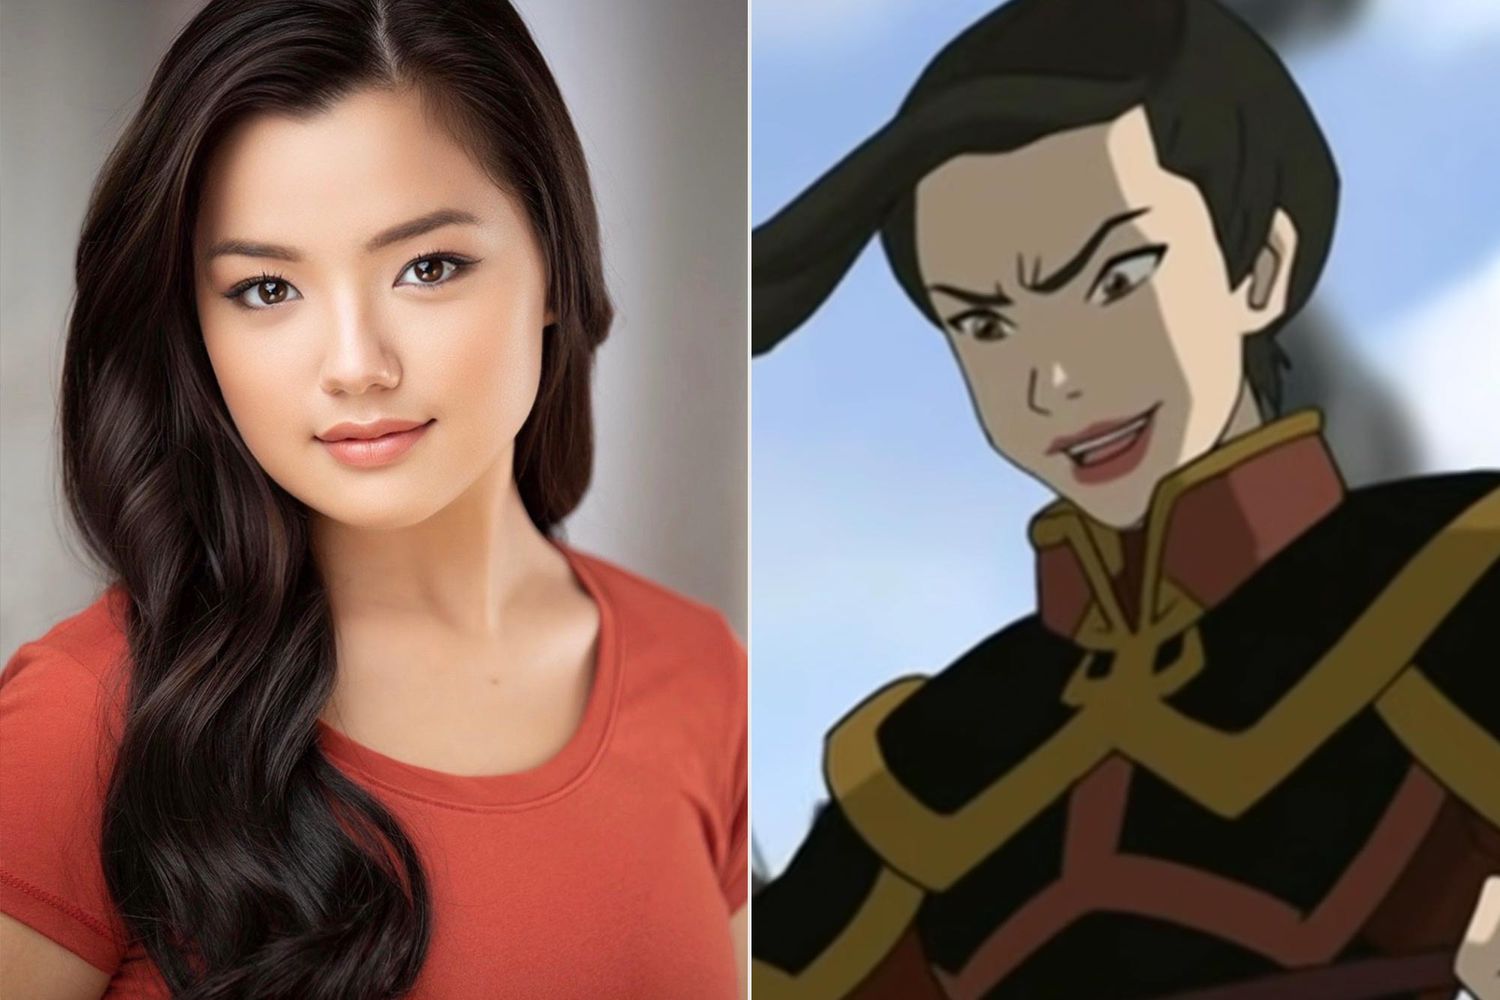 Elizabeth Yu and the character Azula from Avatar: The Last Airbender